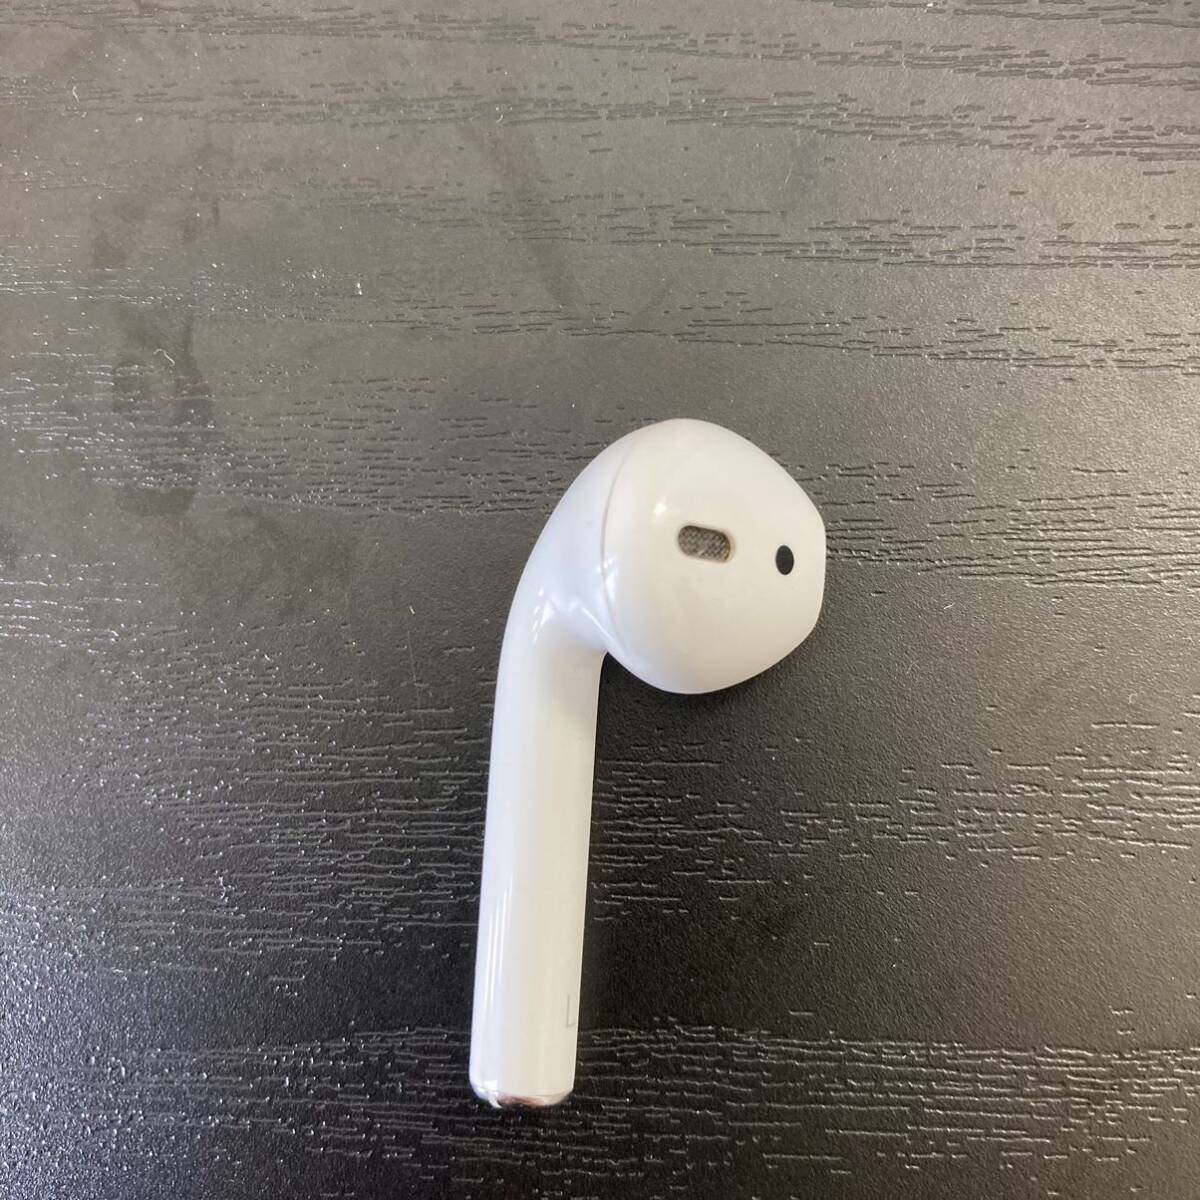 AirPods エアポッズ 第2世代 A2031 左耳のみ P-3_画像1